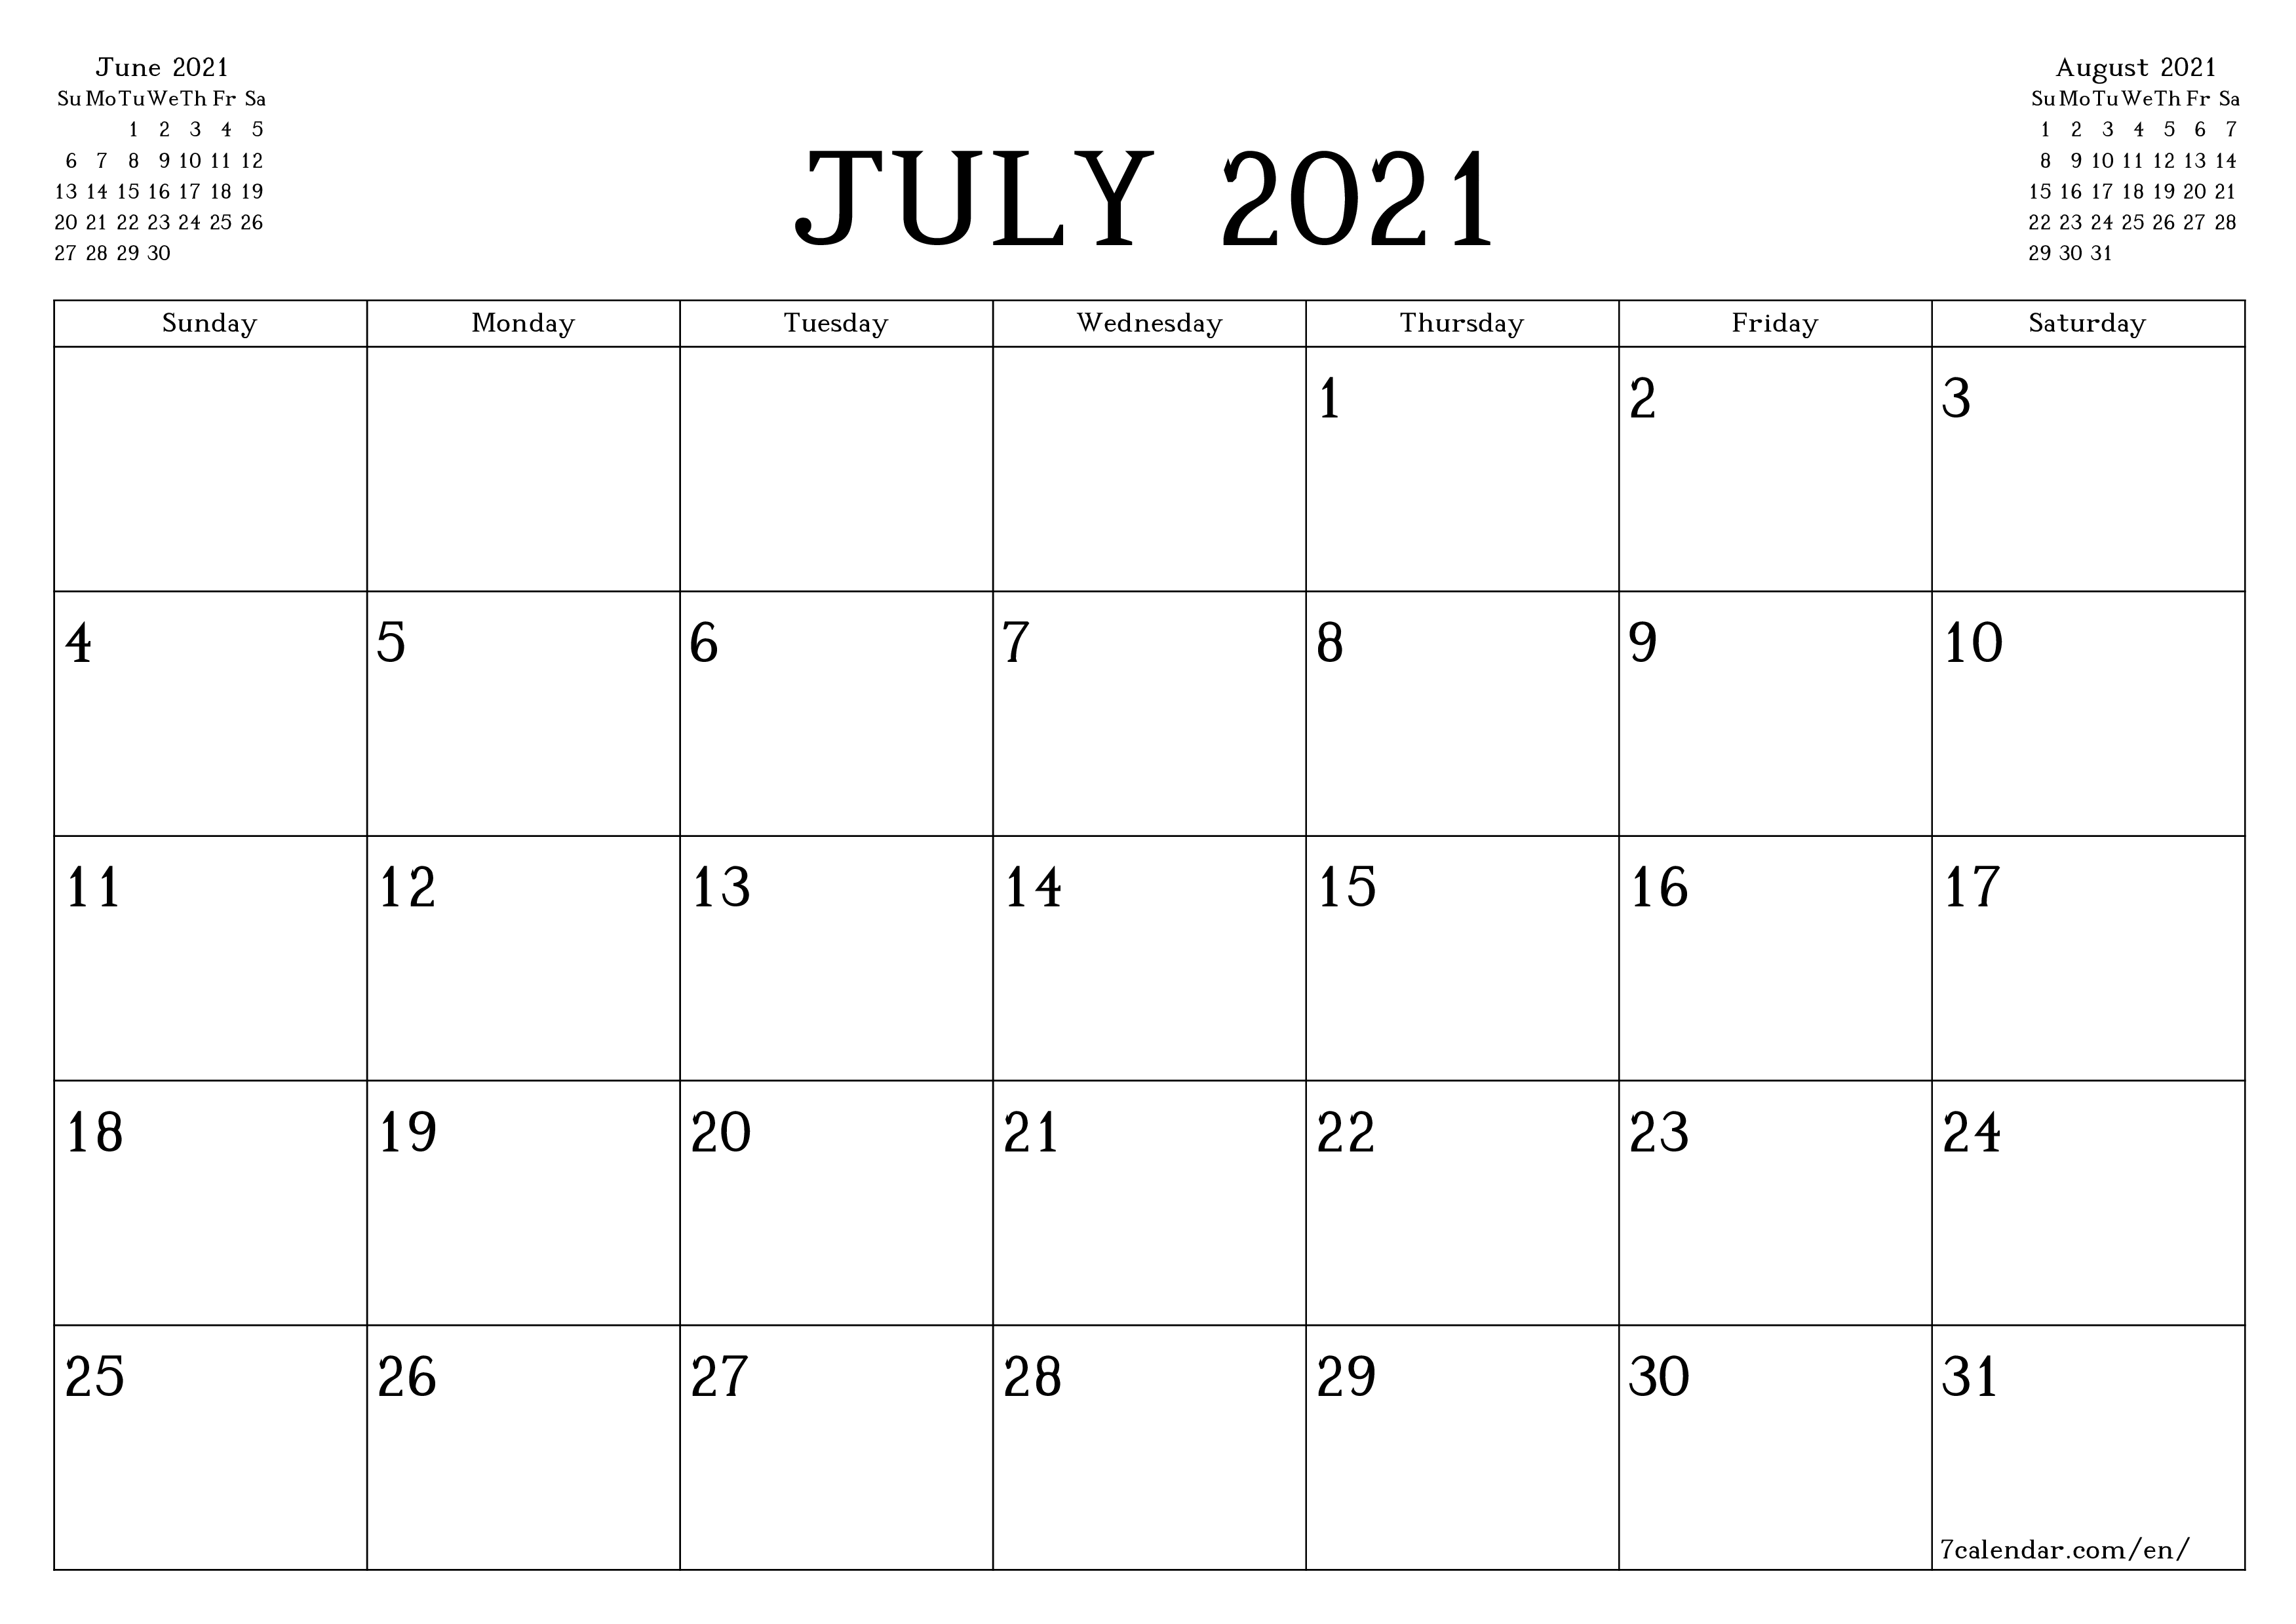 Blank monthly calendar planner for month July 2021 with notes save and print to PDF PNG English - 7calendar.com